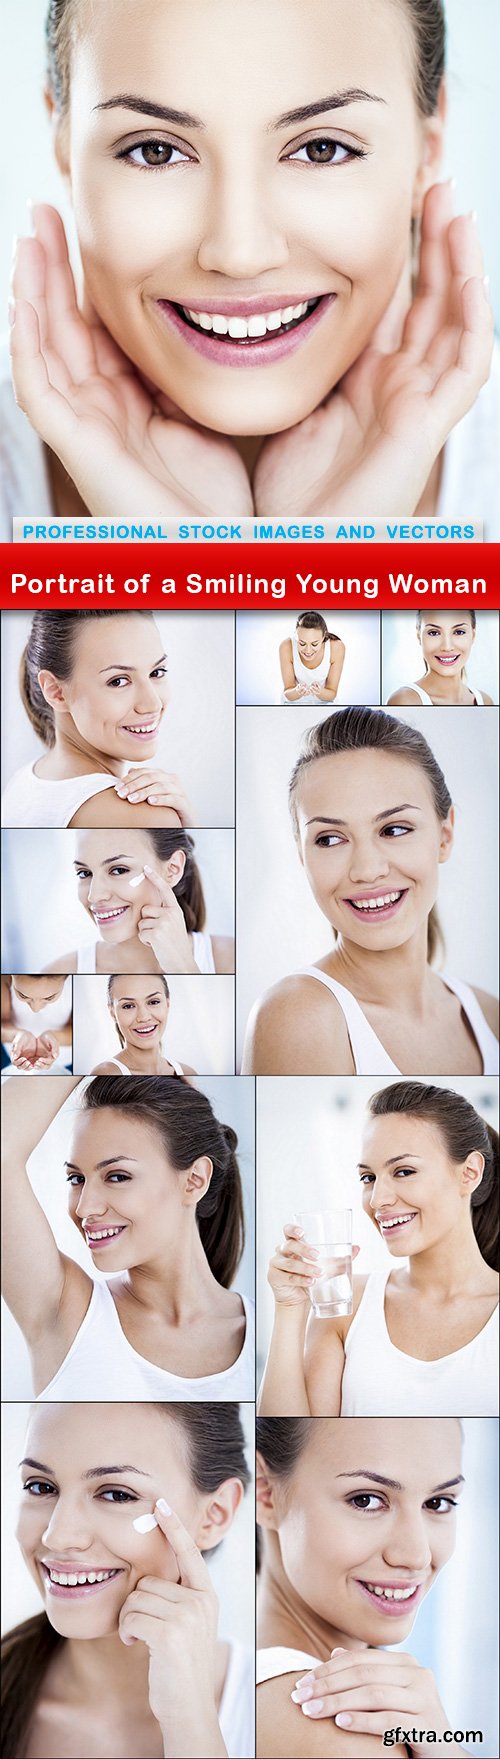 Portrait of a Smiling Young Woman - 12 UHQ JPEG